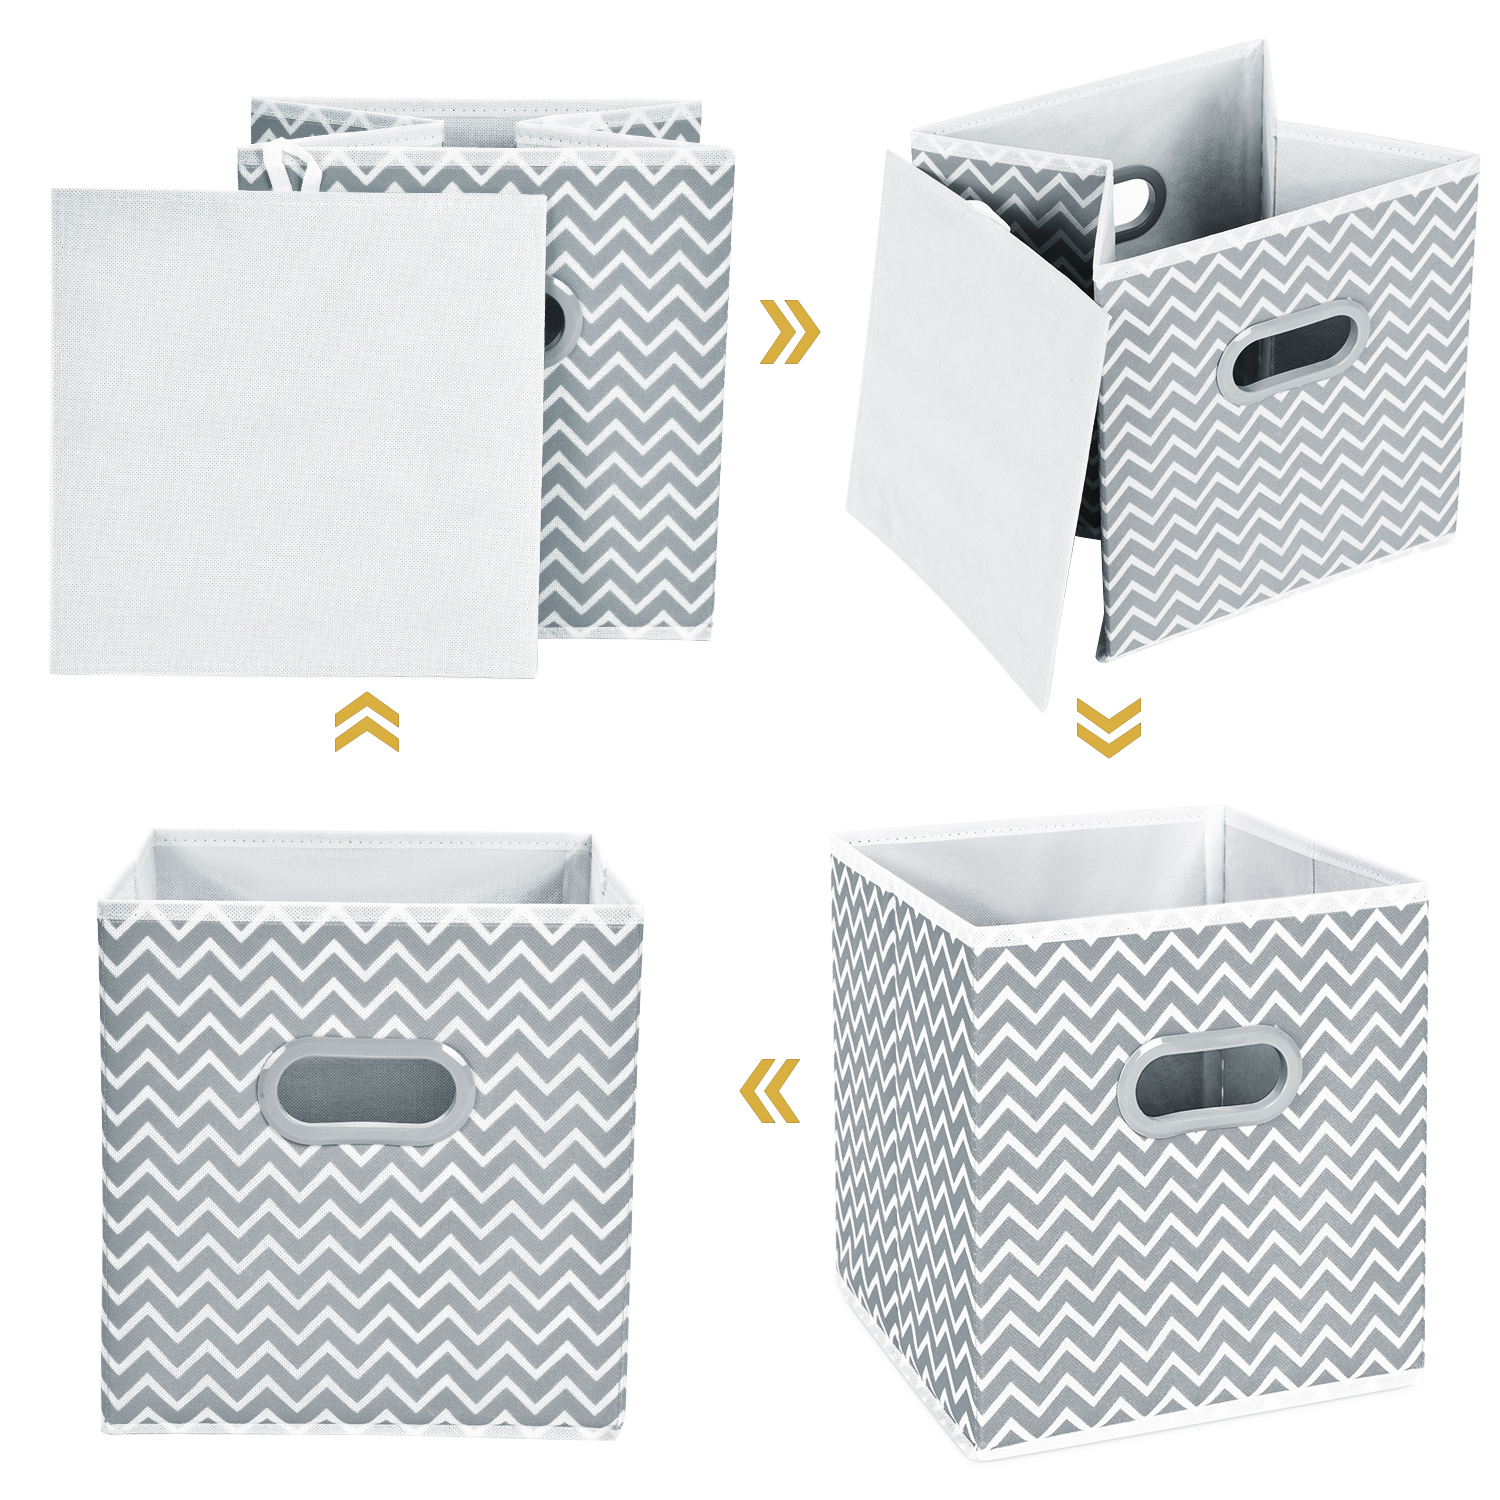 Cloth Storage Bins Maidmax Set Of 6 Foldable Collapsible Fabric pertaining to sizing 1500 X 1500